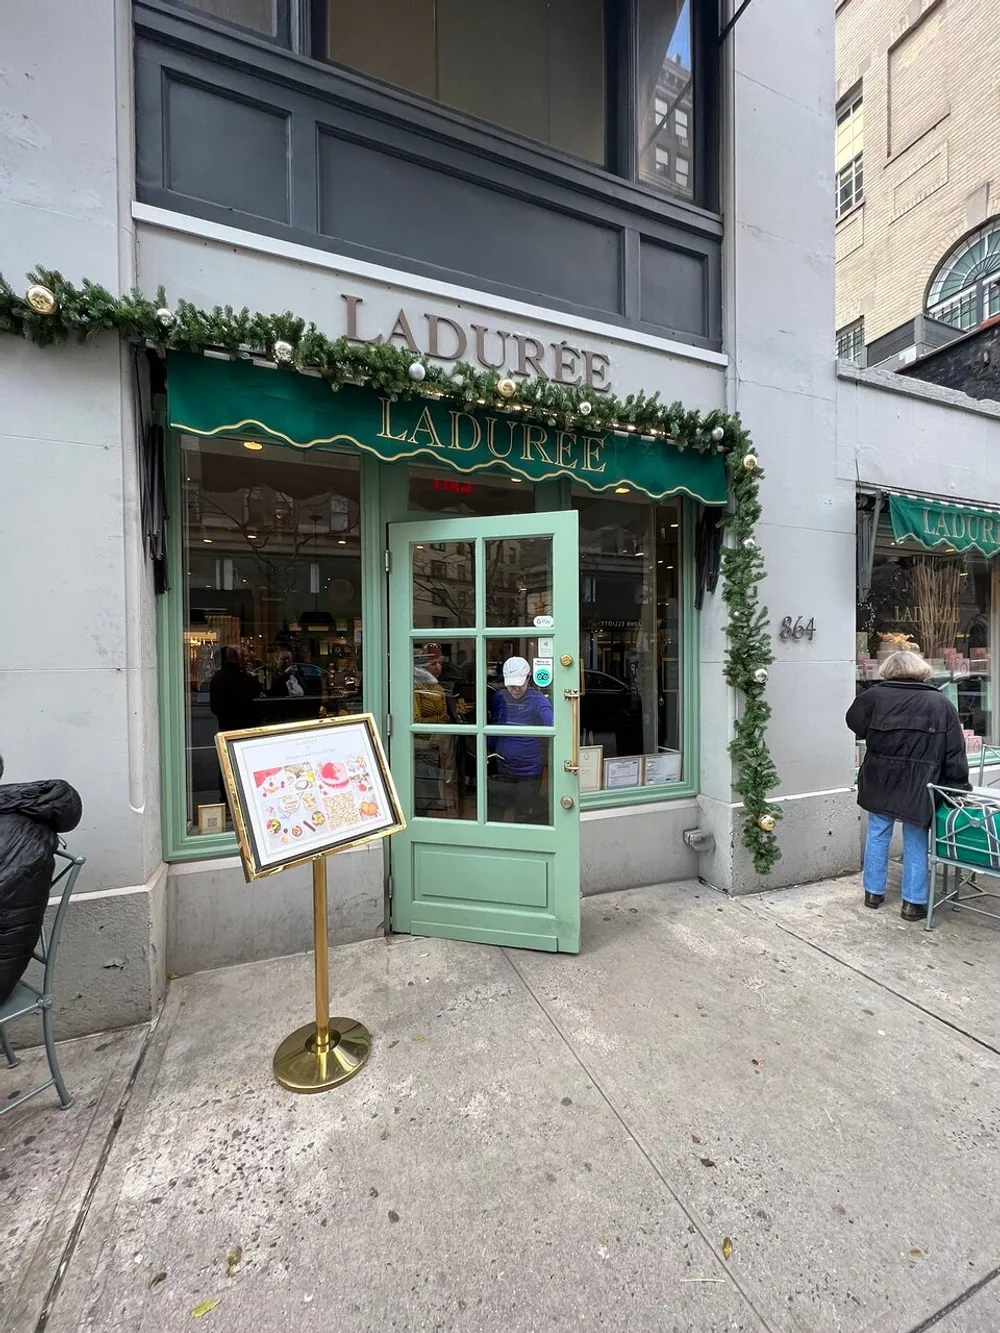 The image shows the exterior of a Ladure patisserie decorated with festive greenery featuring its pastel green storefront with a menu stand outside and a glimpse of the interior where customers are present